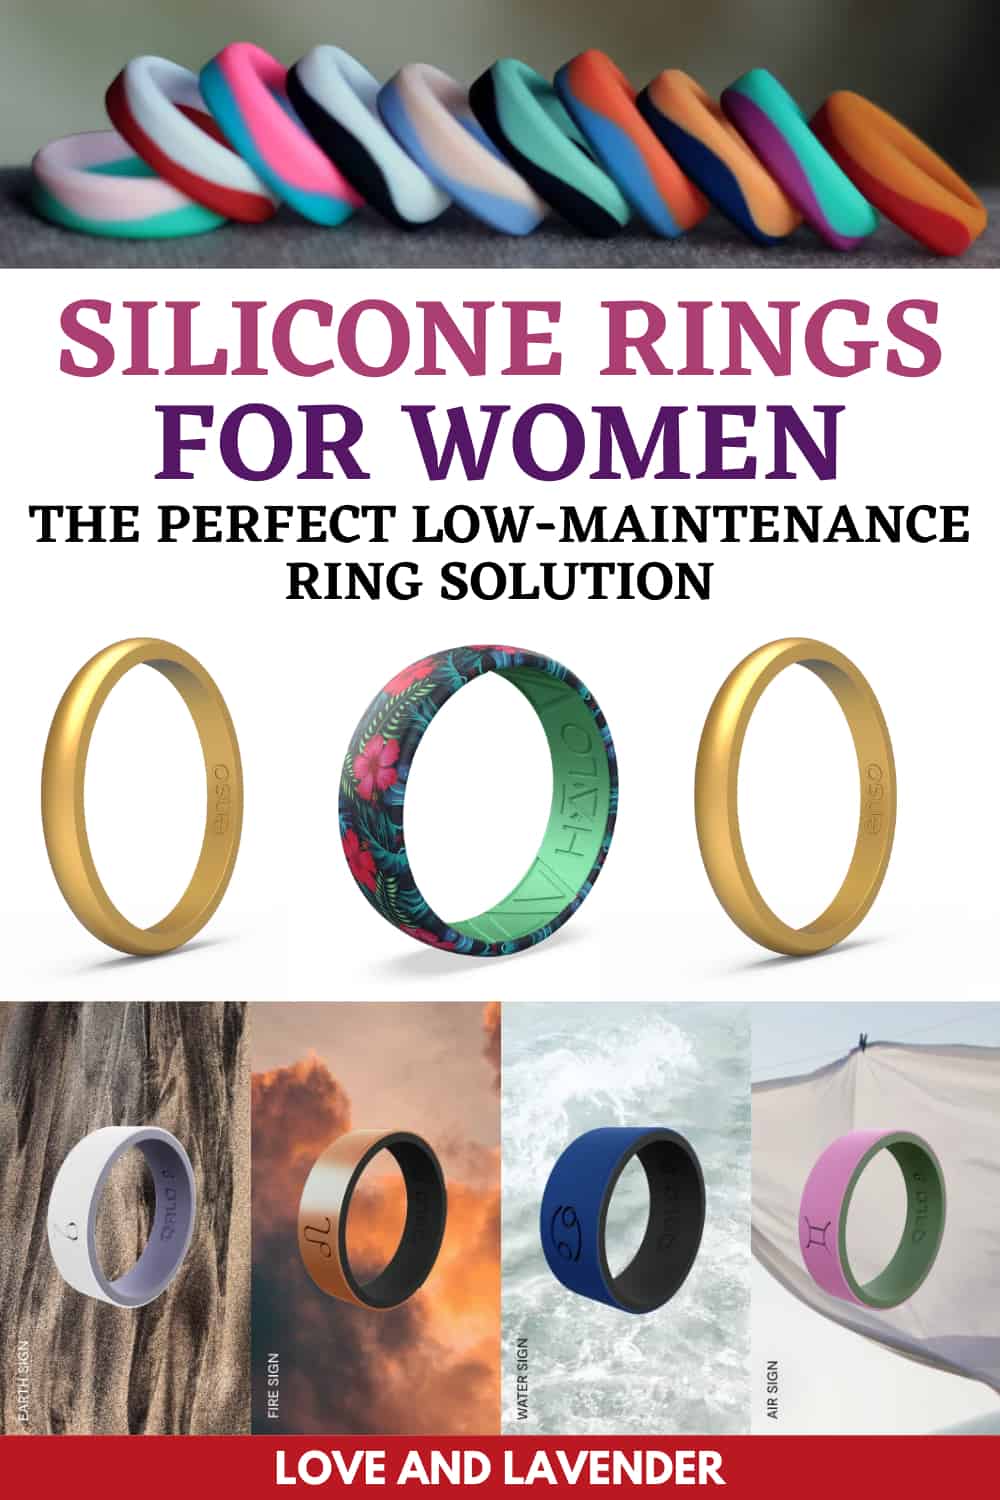 16 of the Best Silicone Rings for Women - Pinterest Pin